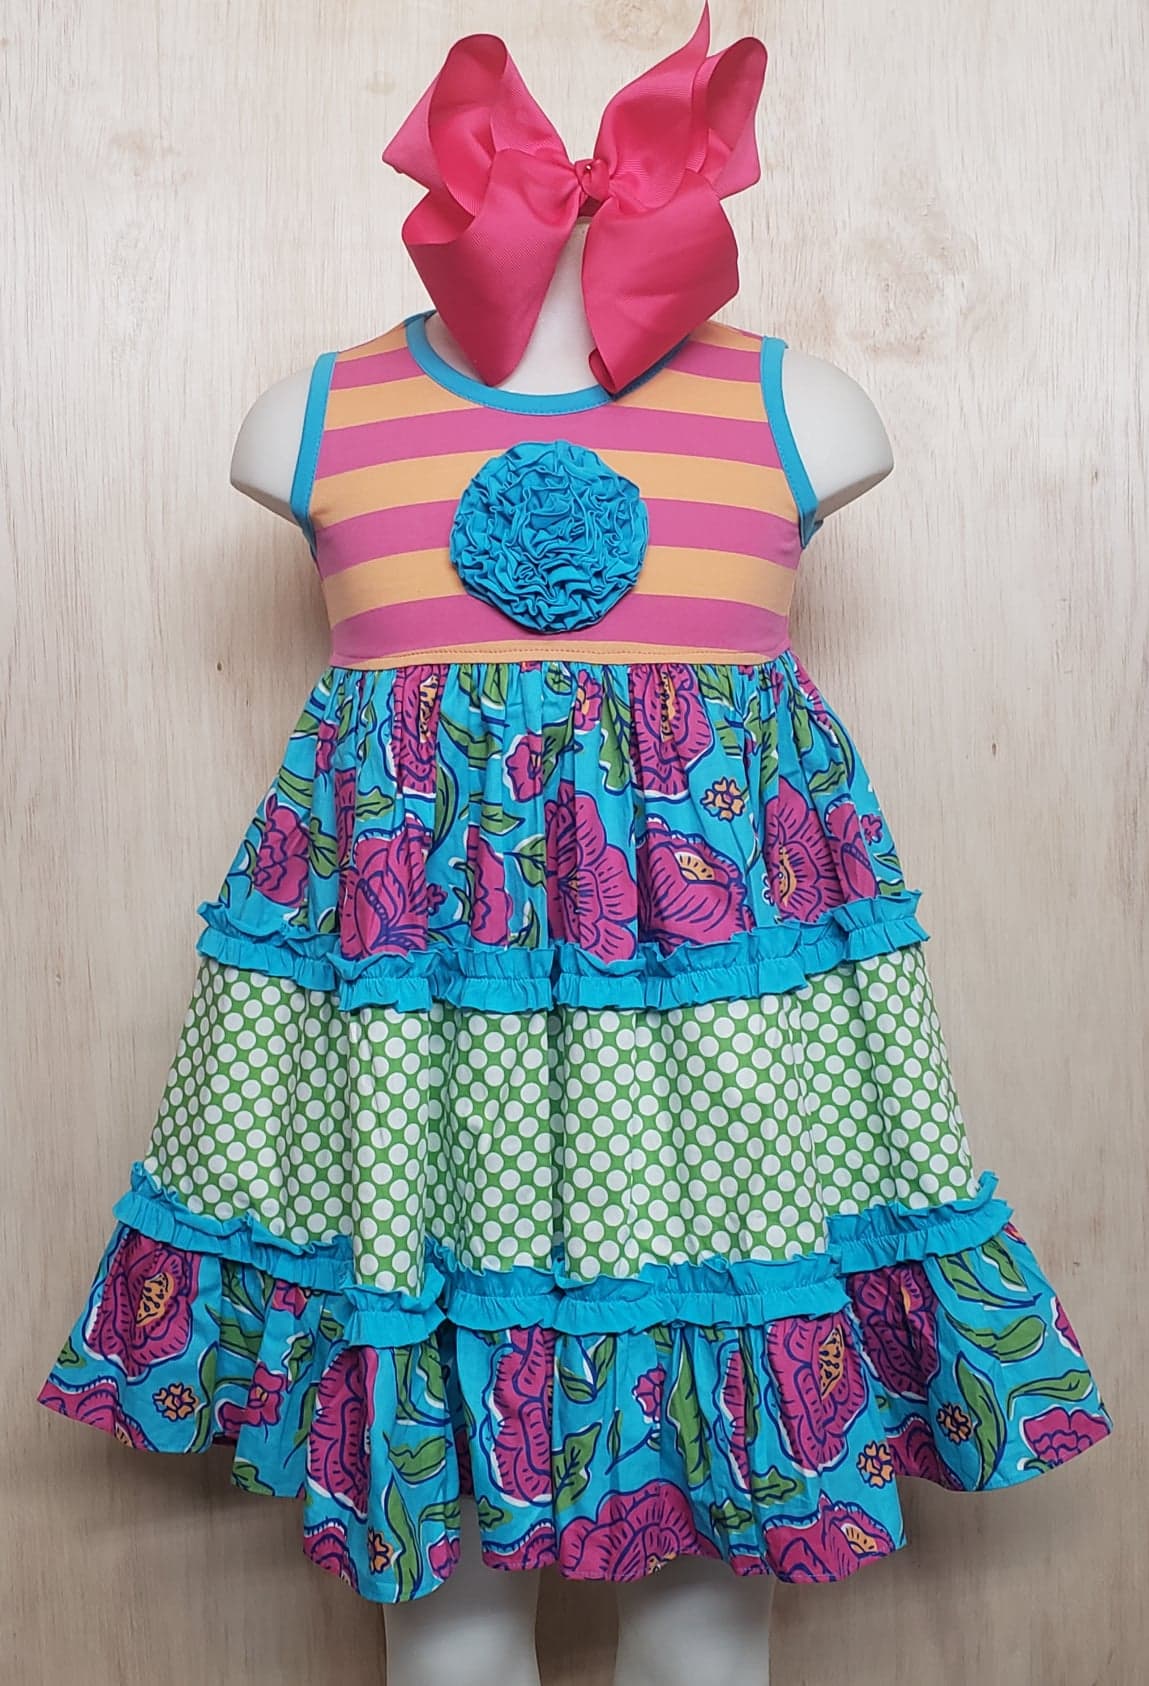 Turquoise Jewel Panel Dress - Momma G's Children's Boutique, Screen Printing, Embroidery & More